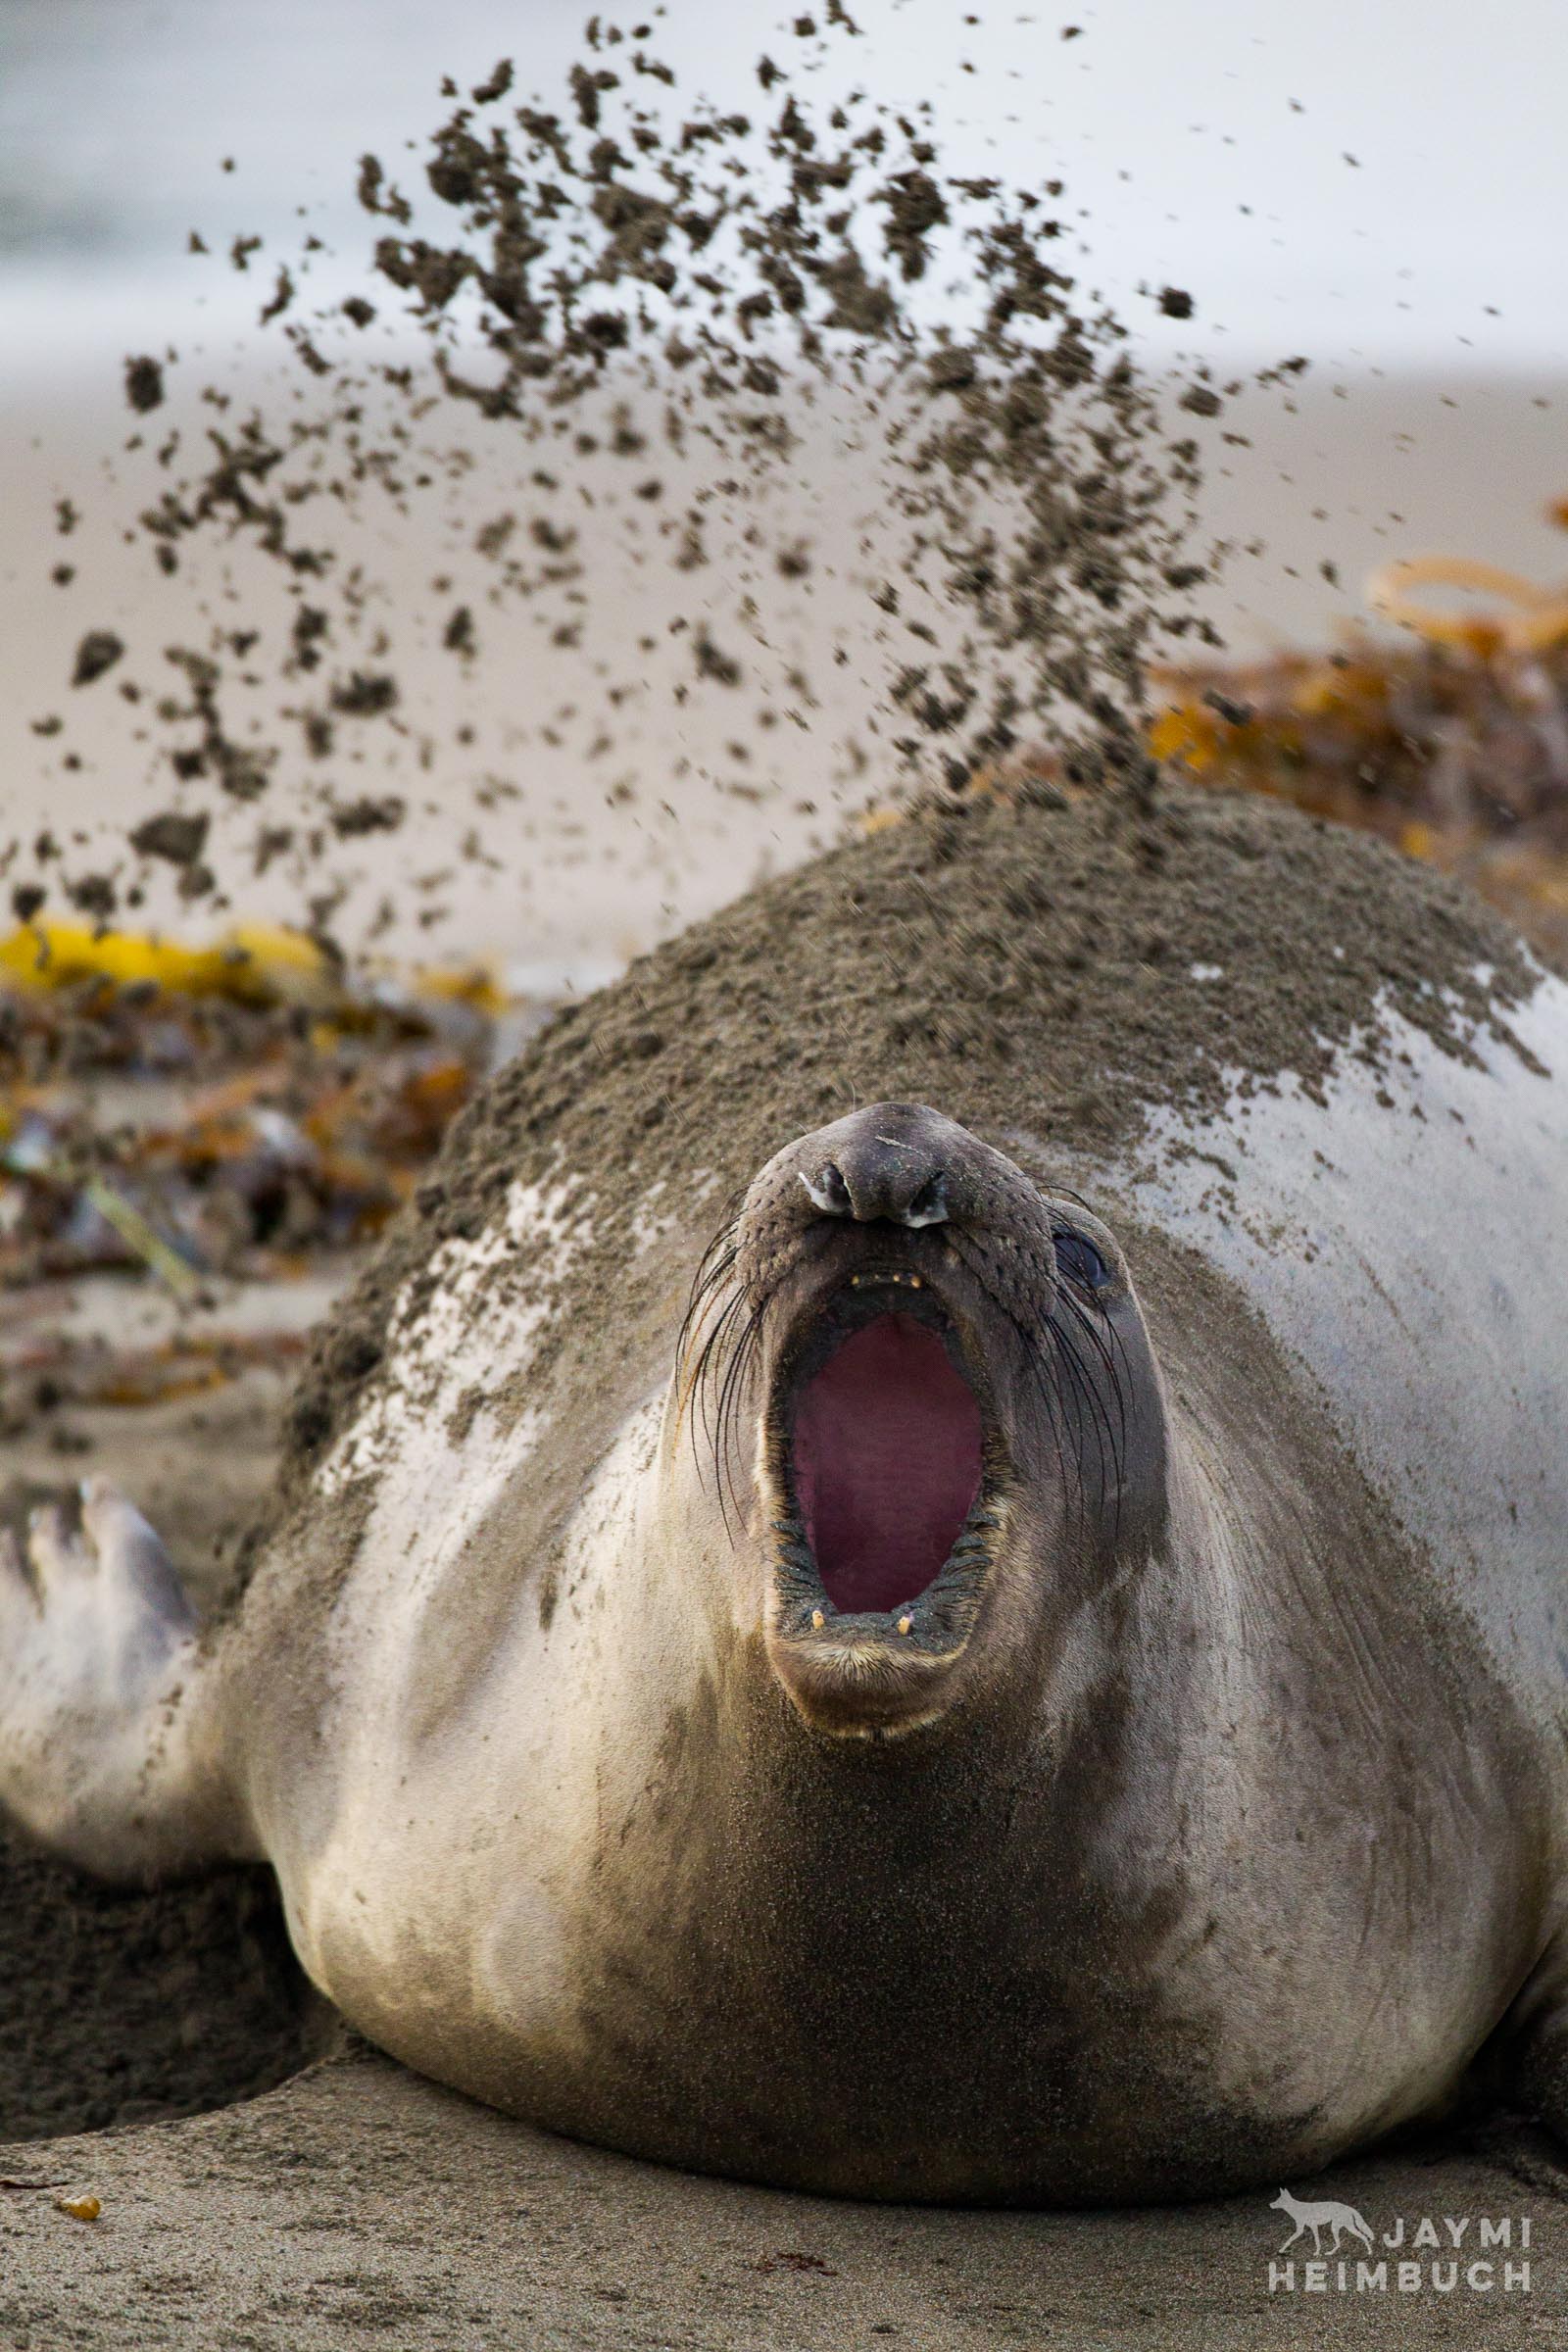 A female northern elephant seal (Mirounga angustirostris) throws sand while bellowing